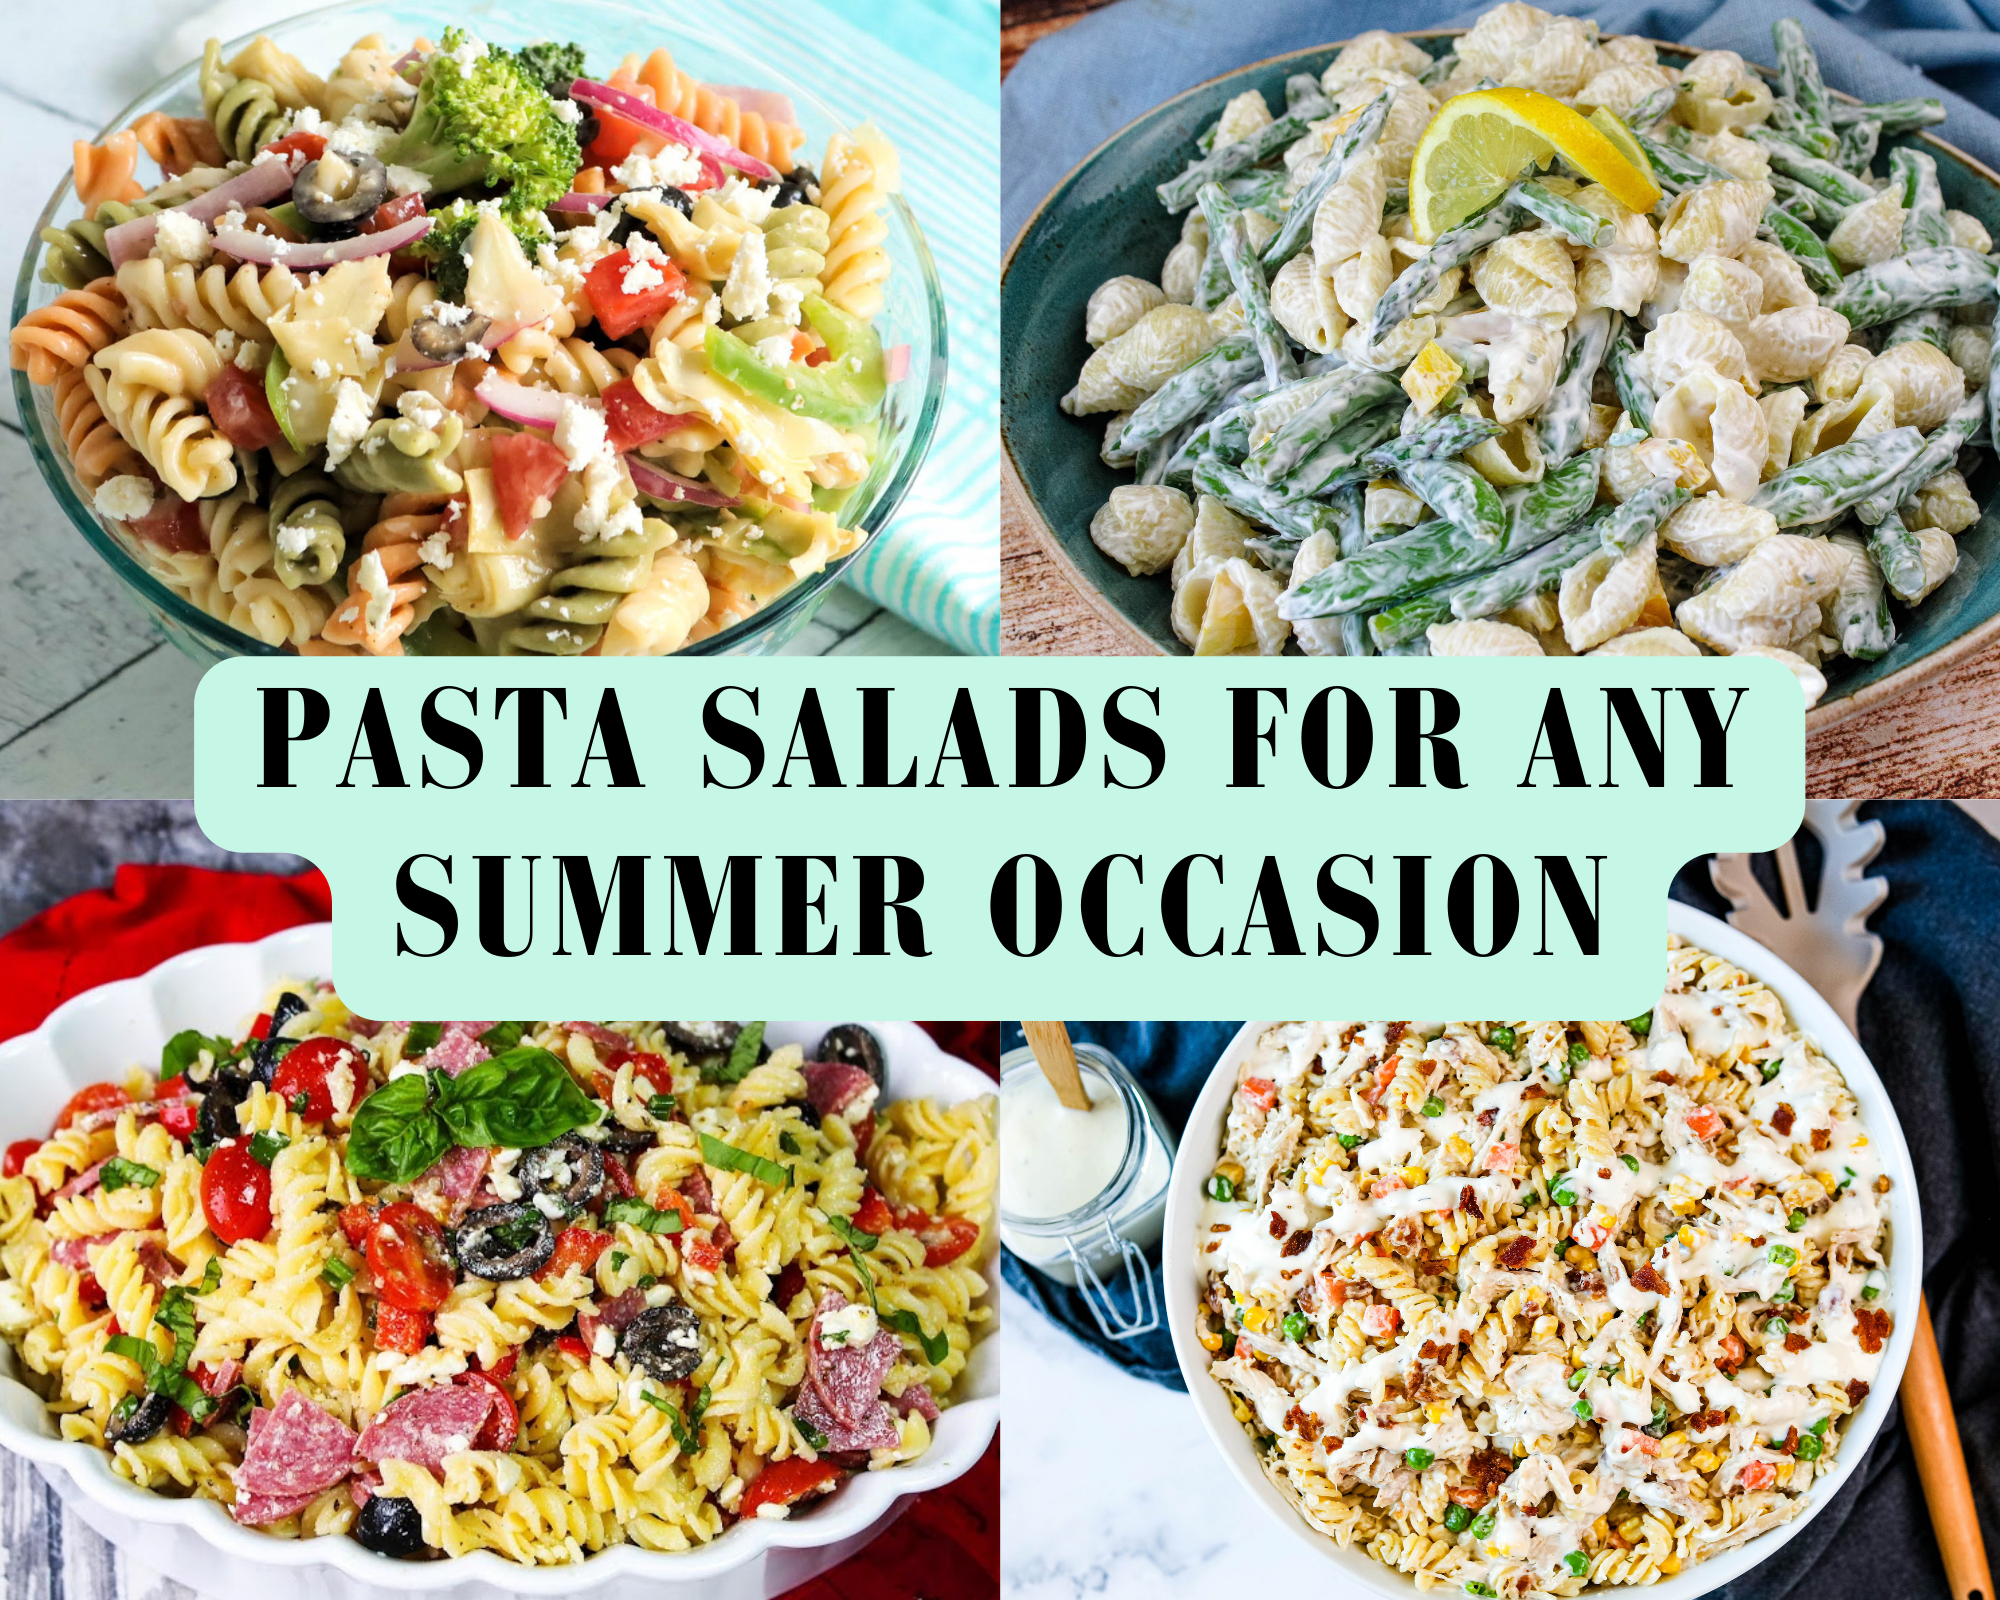 Pasta Salads for Any Summer Occasion